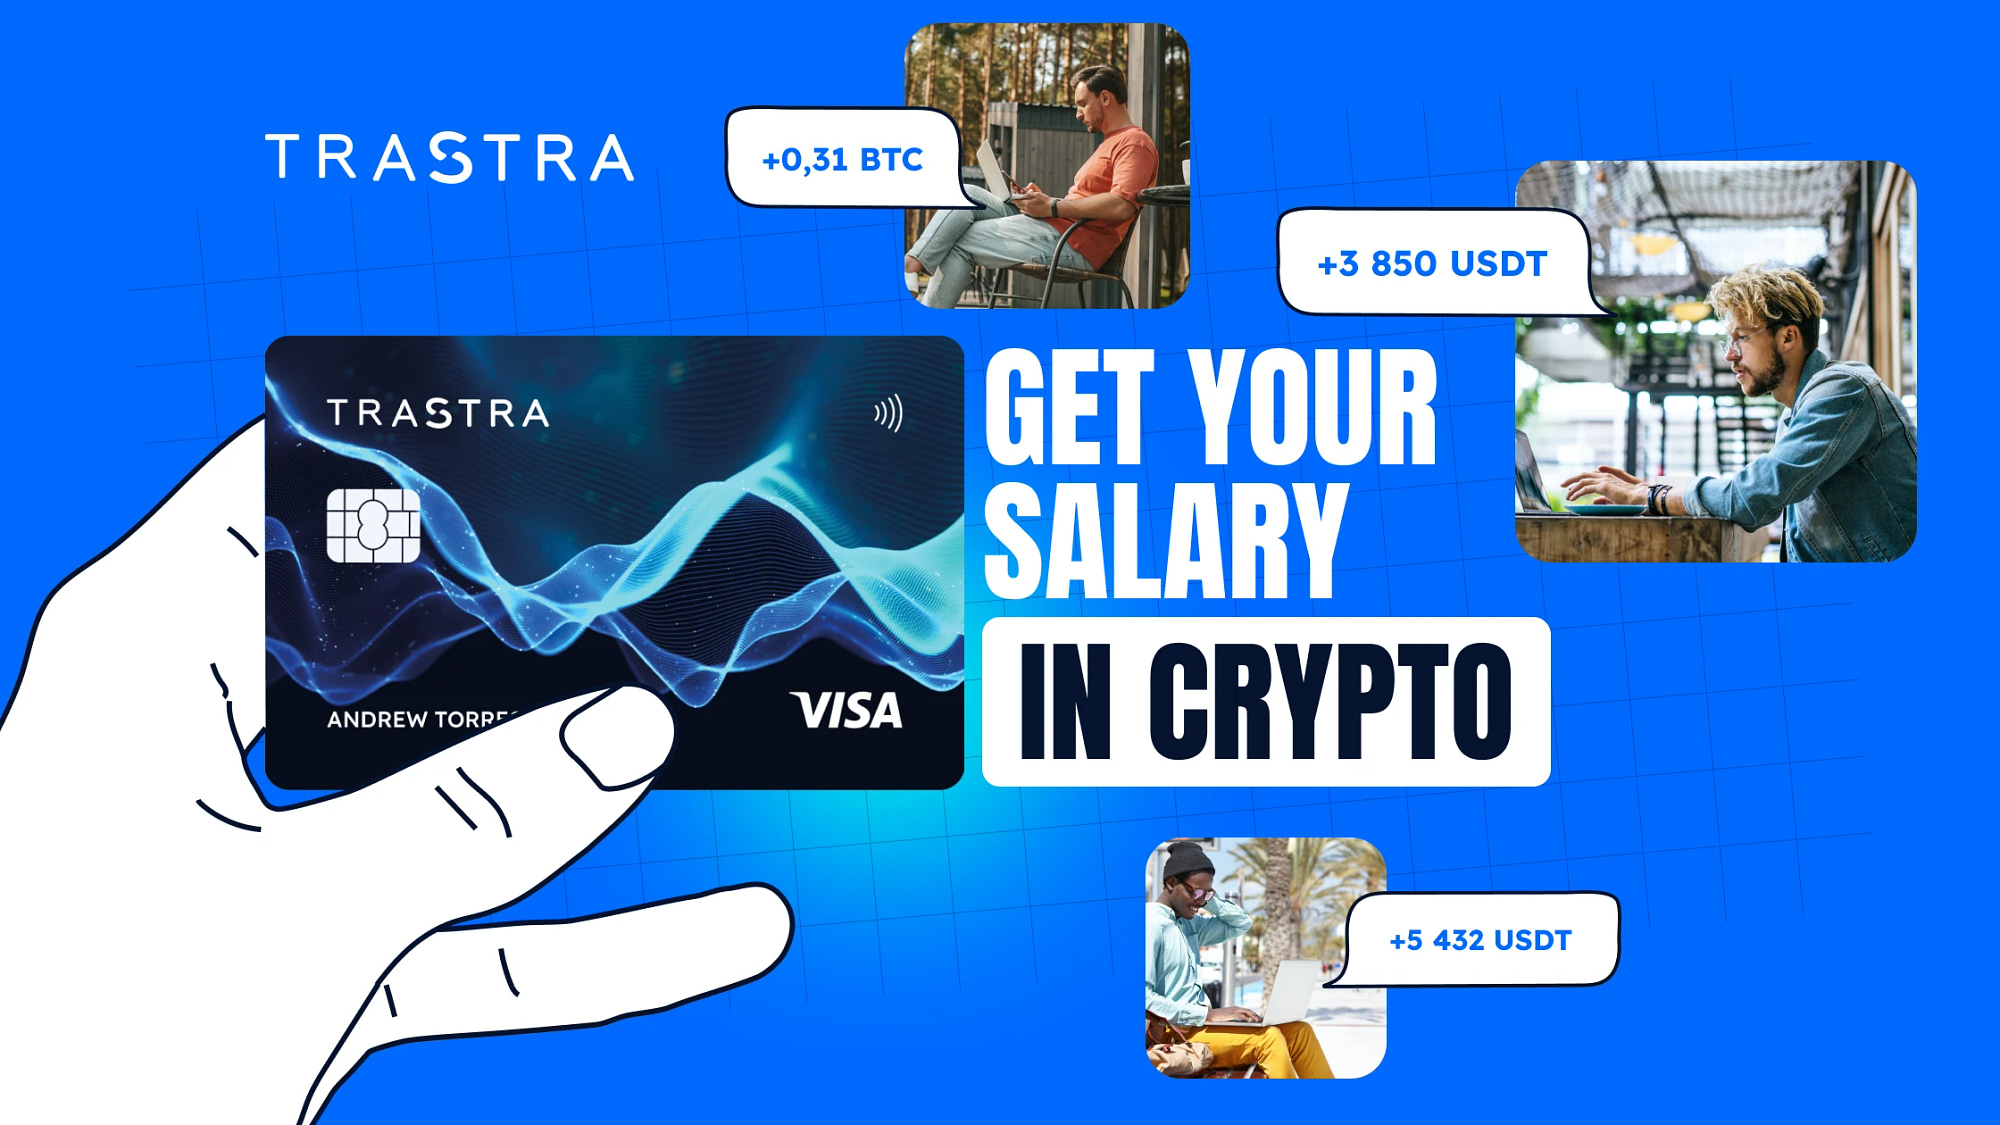 TRASTRA Card Review (2023): Get Your Salary In Crypto